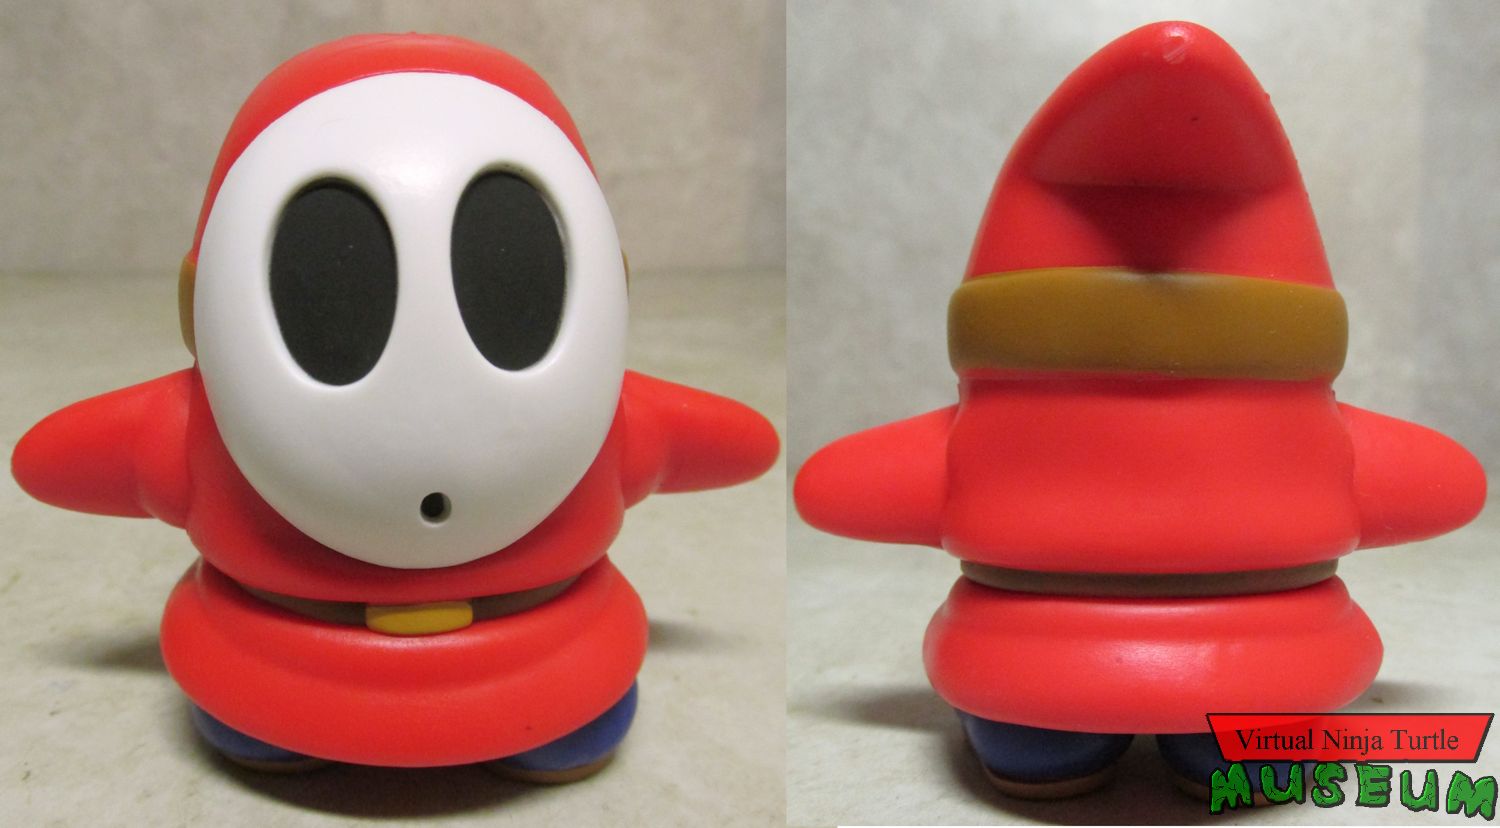 Shy Guy front and back